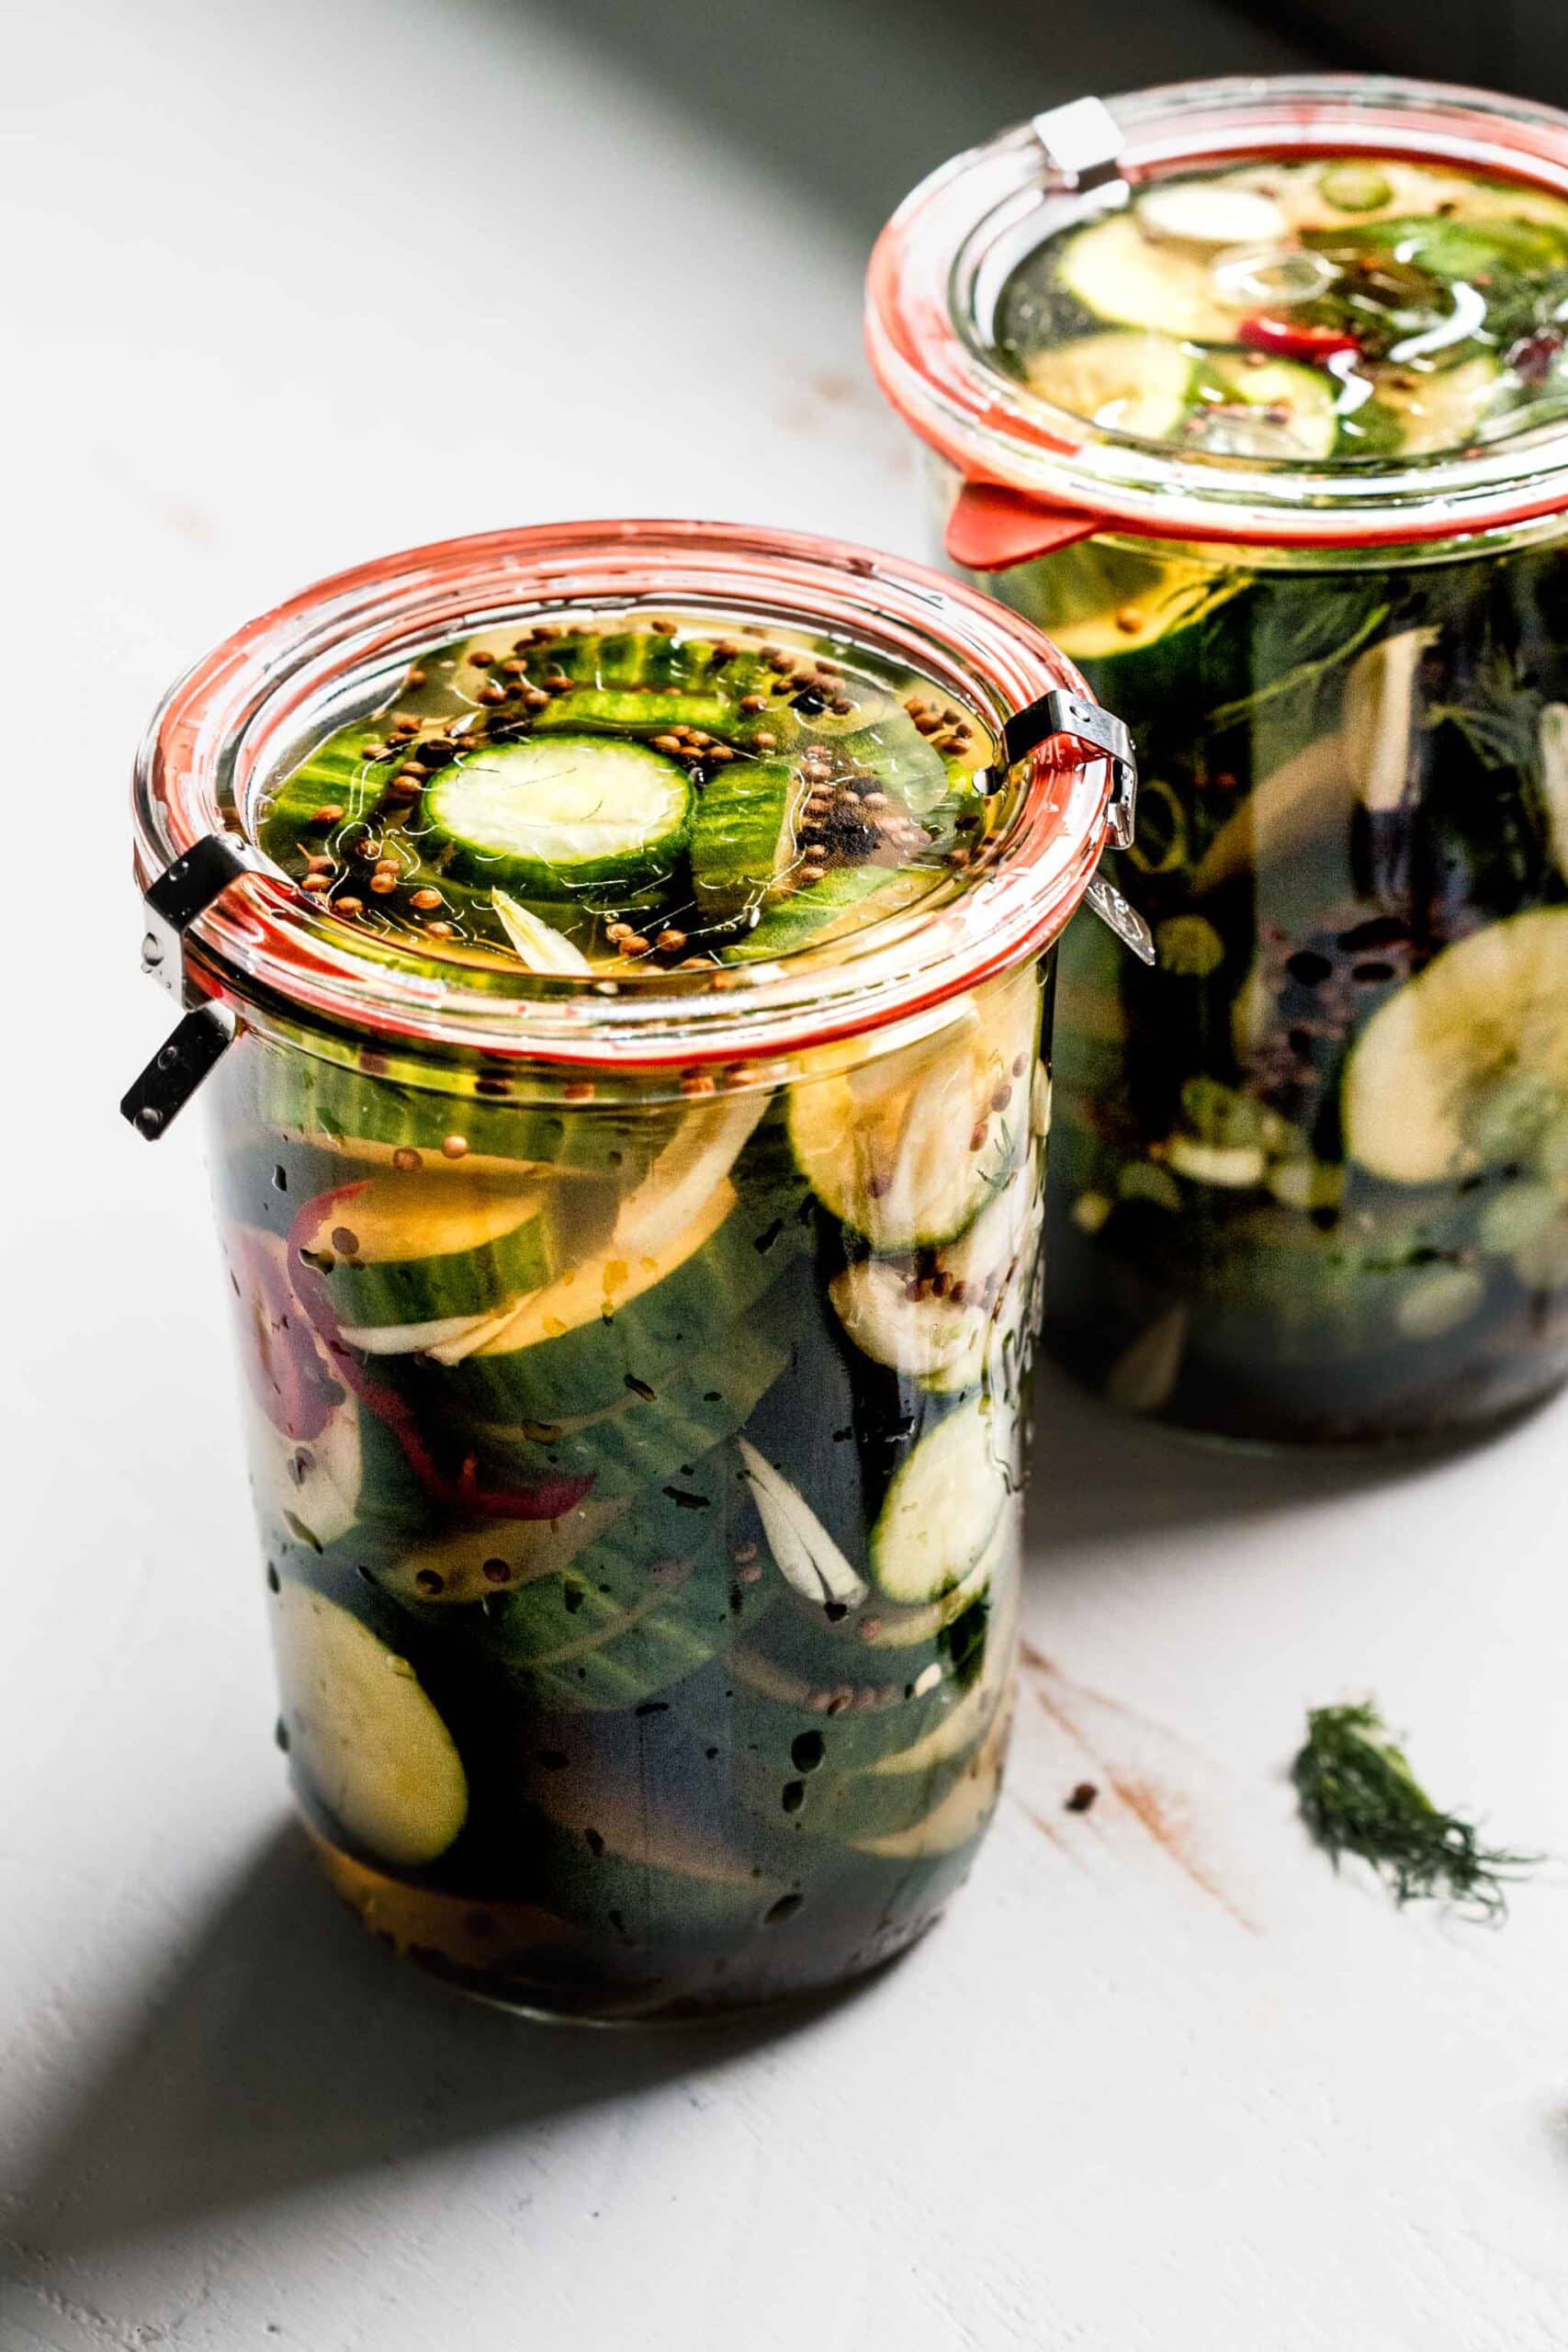 2 jars of pickles with lids on.